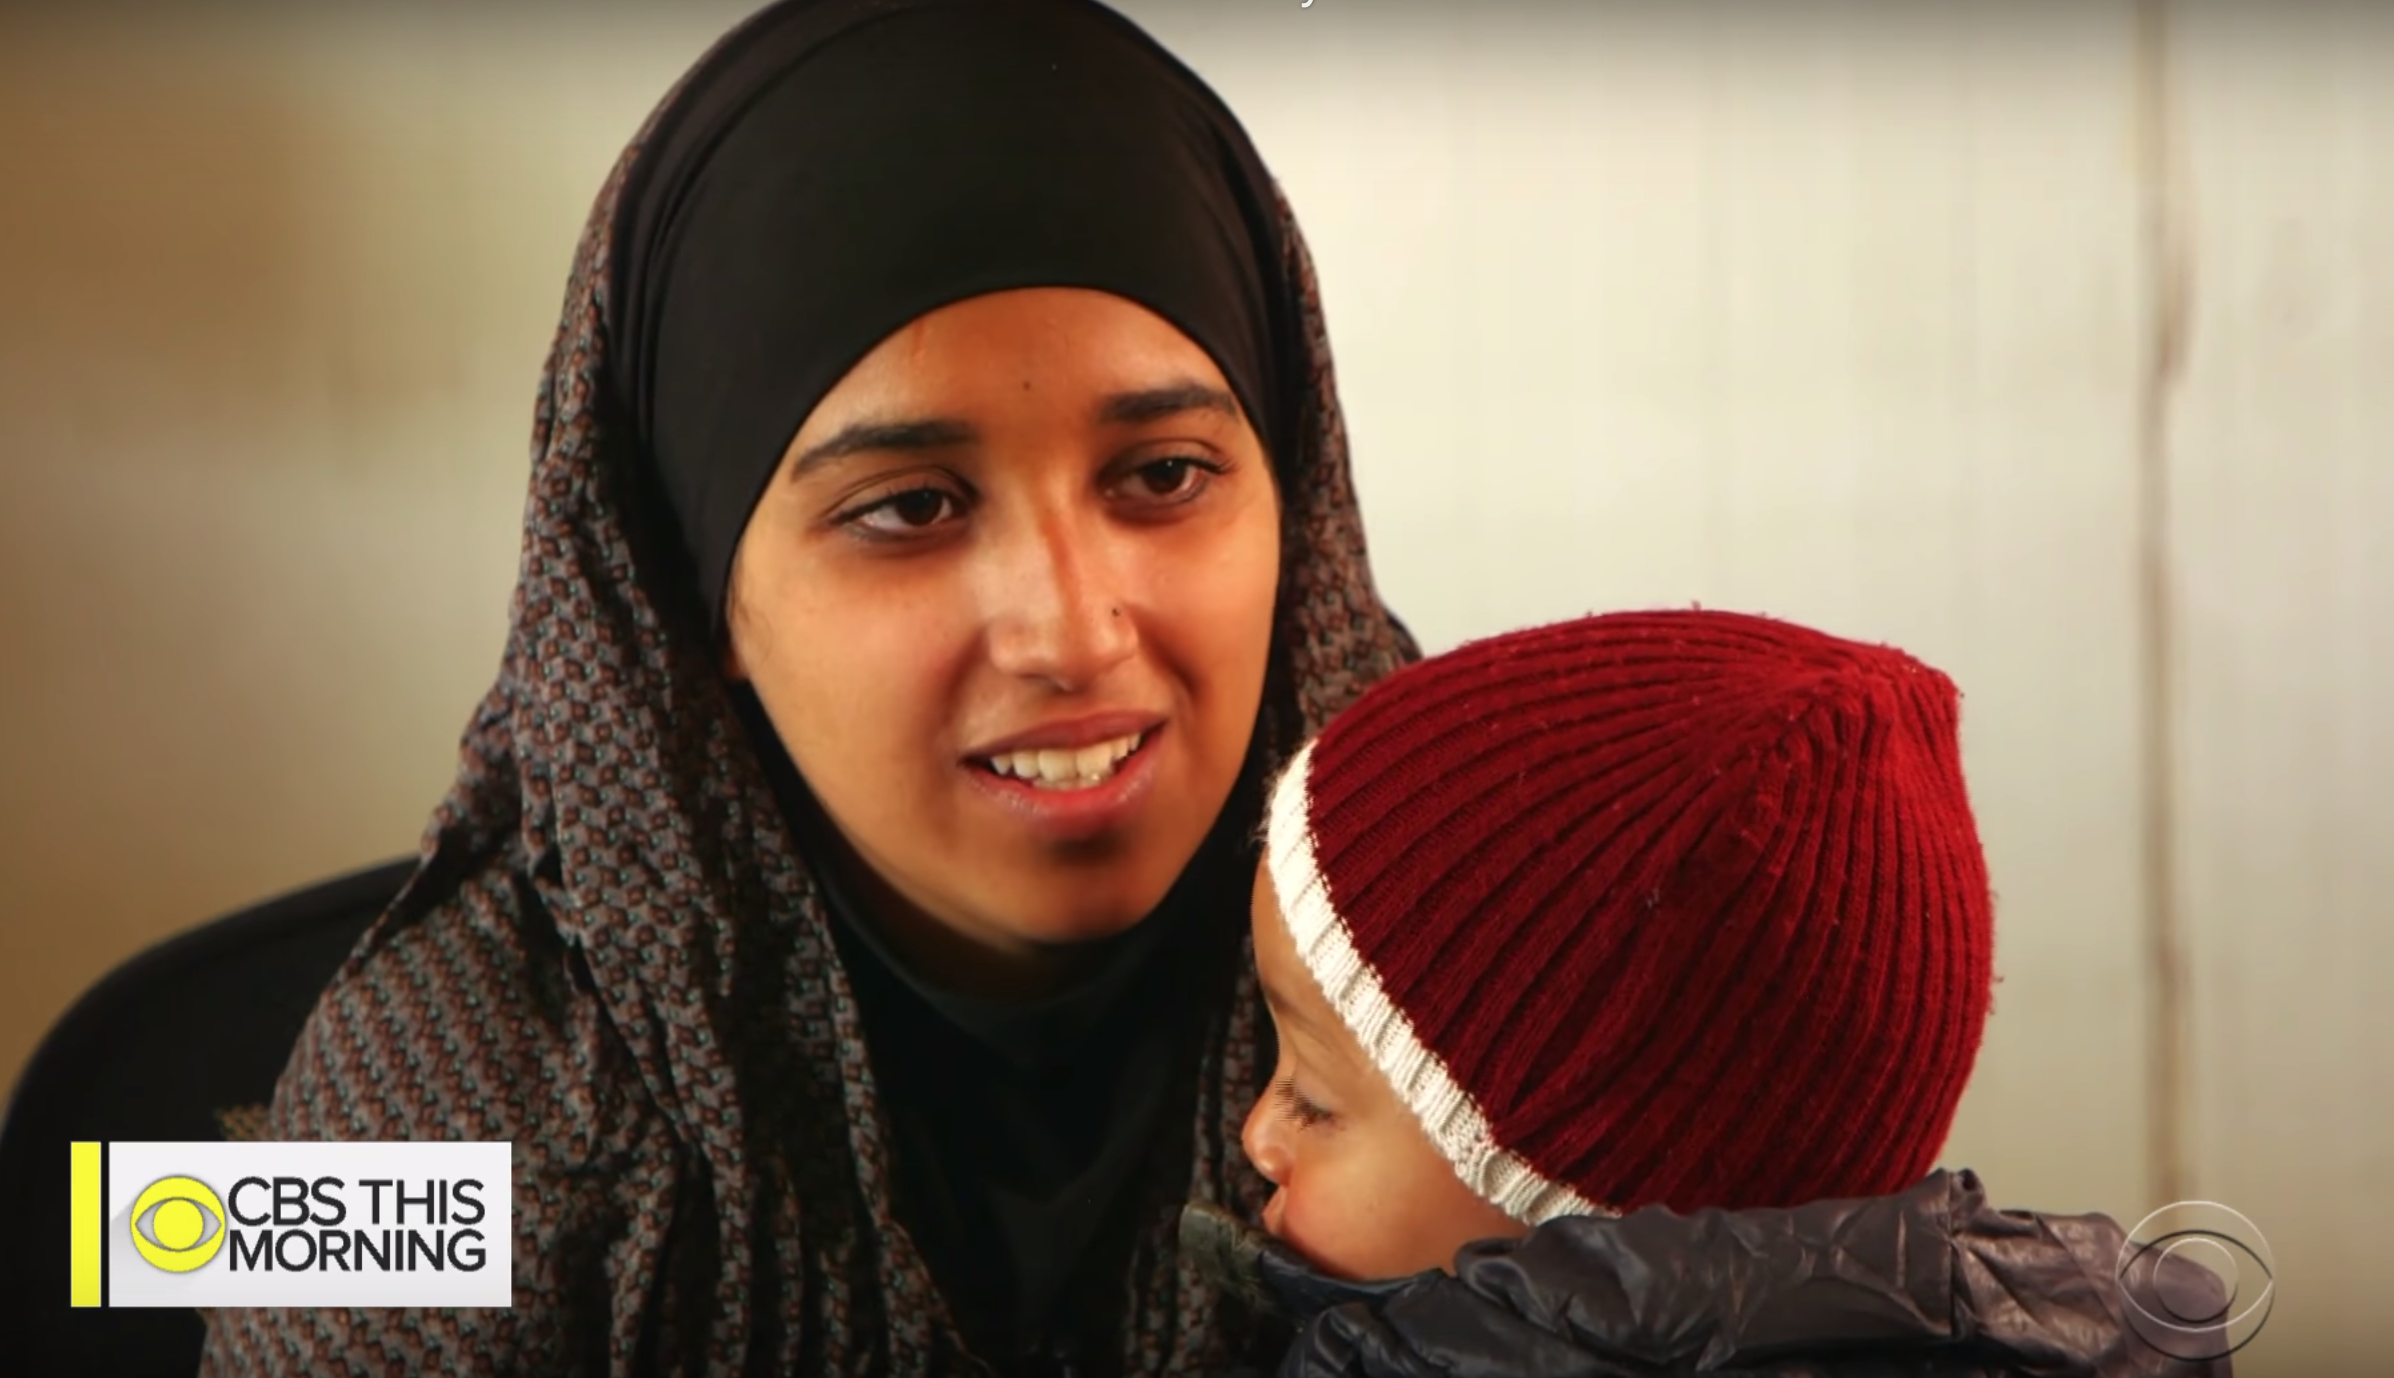 ISIS bride Hoda Muthana claims to have the right to return to the United States after leaving to join the Caliphate, a decision she says she now regrets.